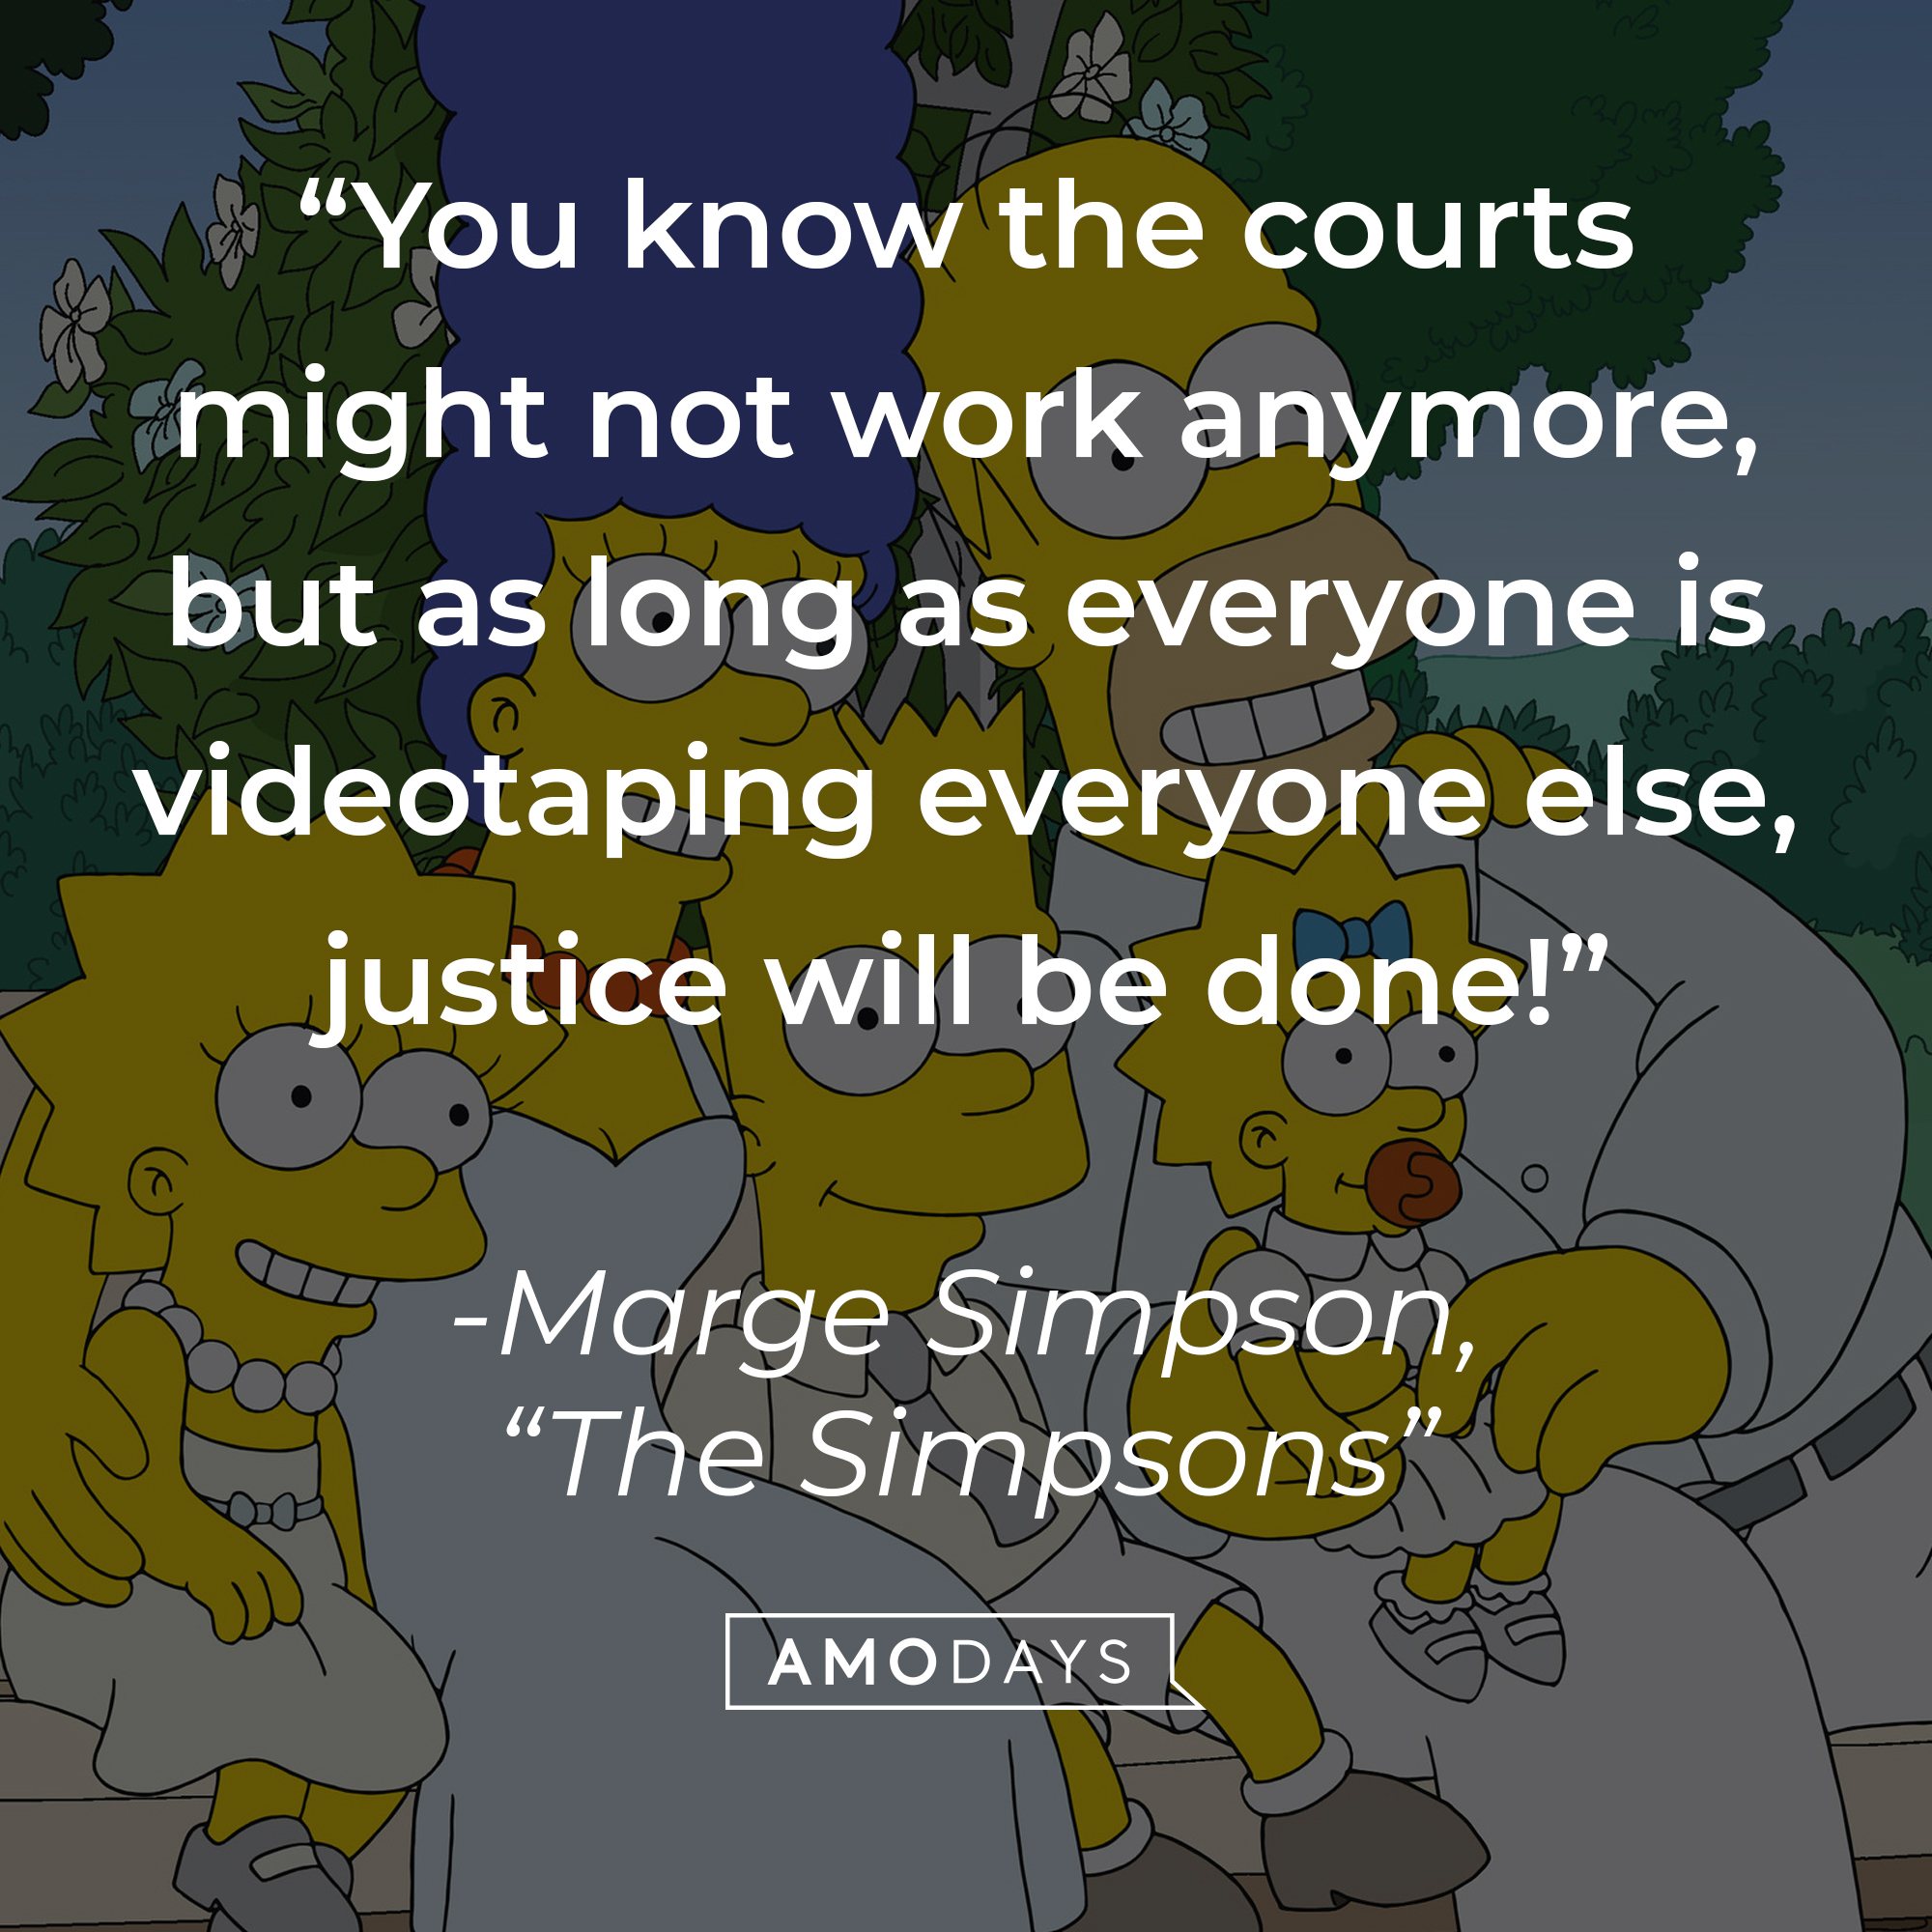 Marge Simpson's quote: "You know the courts might not work anymore, but as long as everyone is videotaping everyone else, justice will be done!" | Image: facebook.com/TheSimpsons